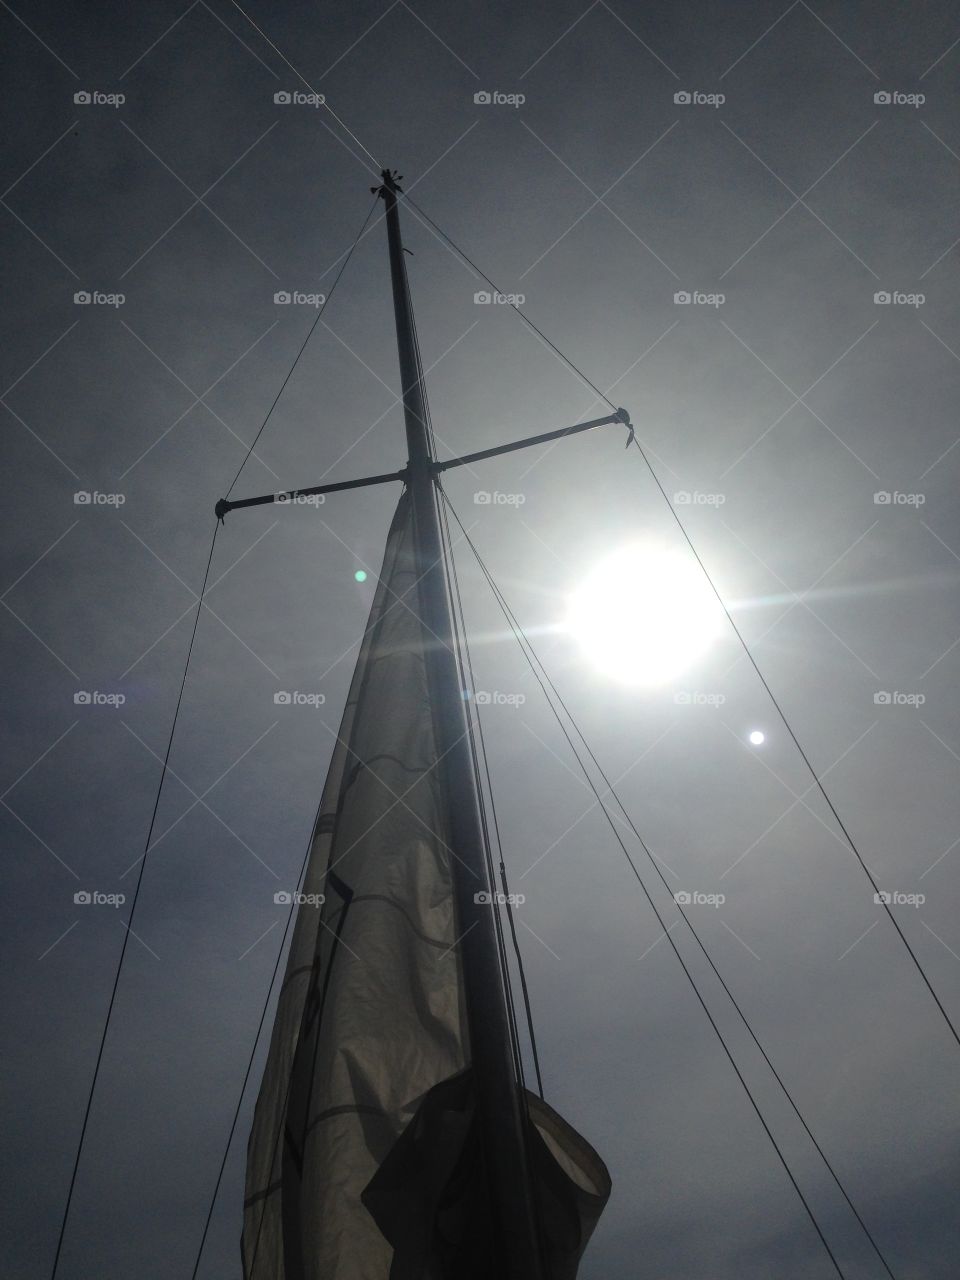 No Person, Wind, Sky, Energy, Sailboat